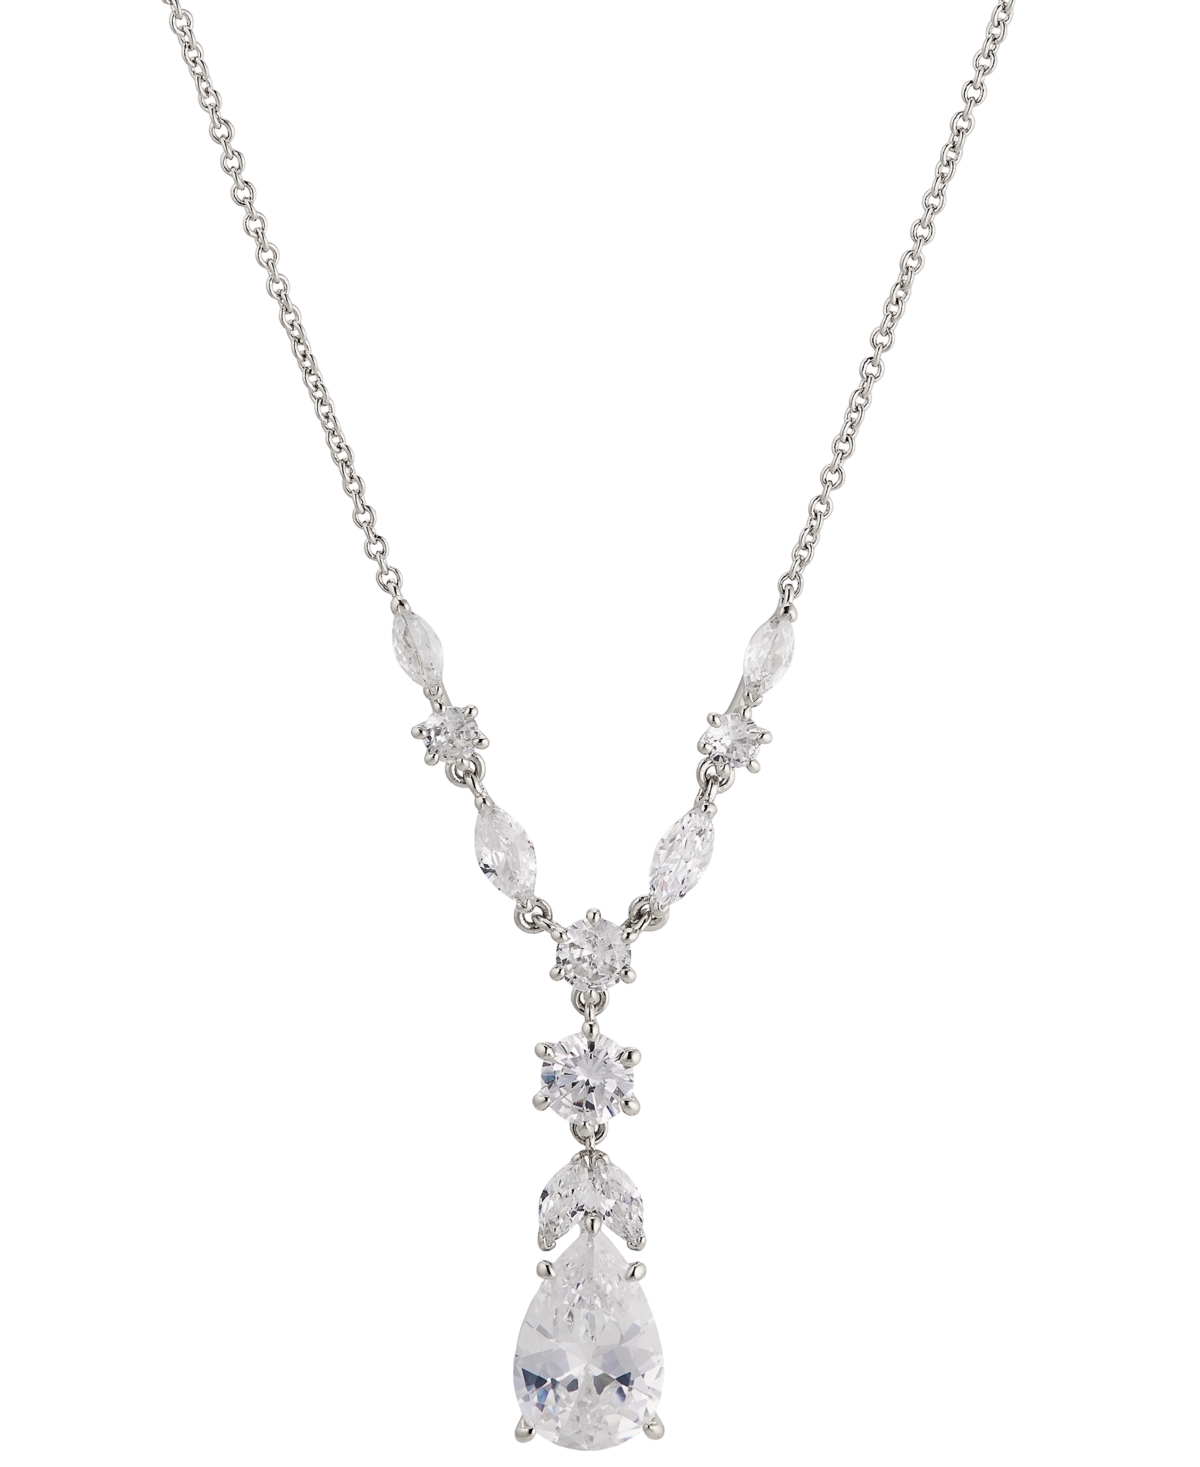 Rhodium-Plated Pear-Shape Cubic Zirconia Lariat Necklace, 16" + 2" extender, Created for Macy's - Rhodium